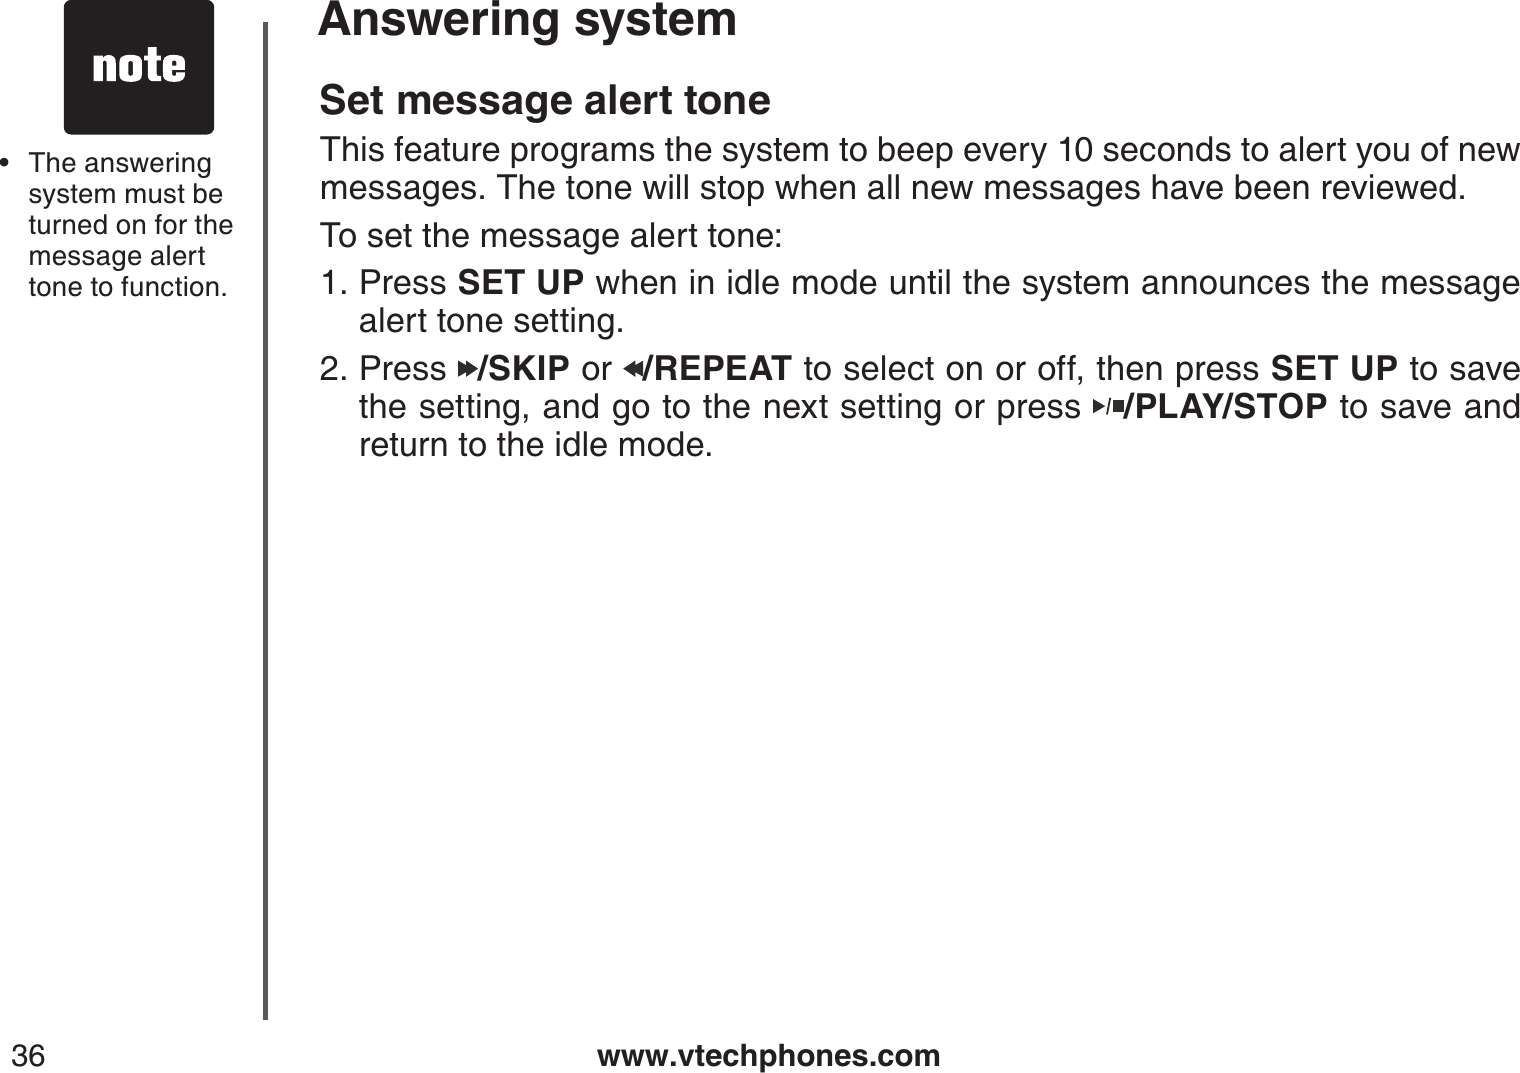 www.vtechphones.com36Answering systemSet message alert toneThis feature programs the system to beep every 10 seconds to alert you of new messages. The tone will stop when all new messages have been reviewed.To set the message alert tone:Press SET UP when in idle mode until the system announces the message alert tone setting.Press  /SKIP or  /REPEAT to select on or off, then press SET UP to save the setting, and go to the next setting or press  /PLAY/STOP to save and return to the idle mode.1.2.The answering system must be turned on for the message alert tone to function. •